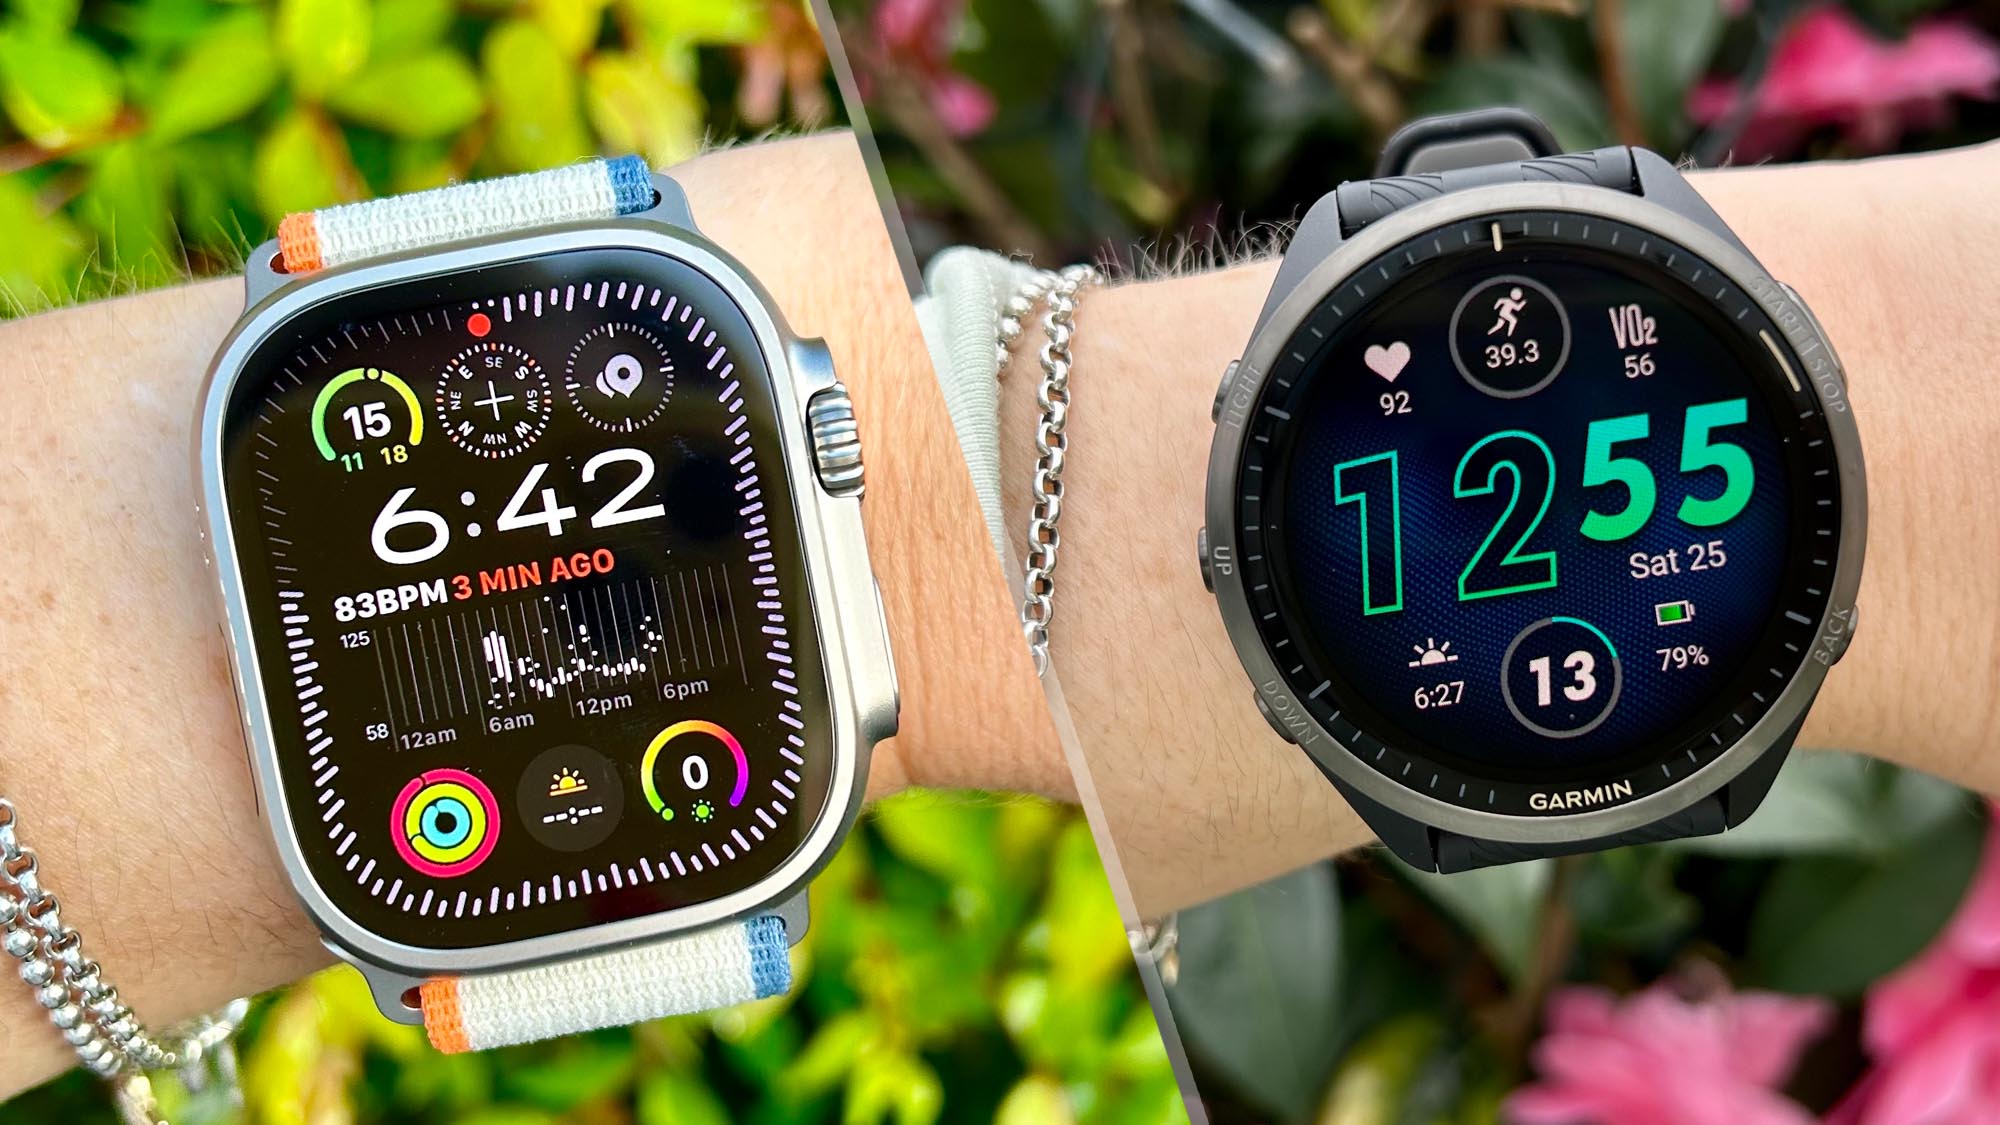 Garmin Forerunner 265 review: OLED the difference - Can Buy or Not